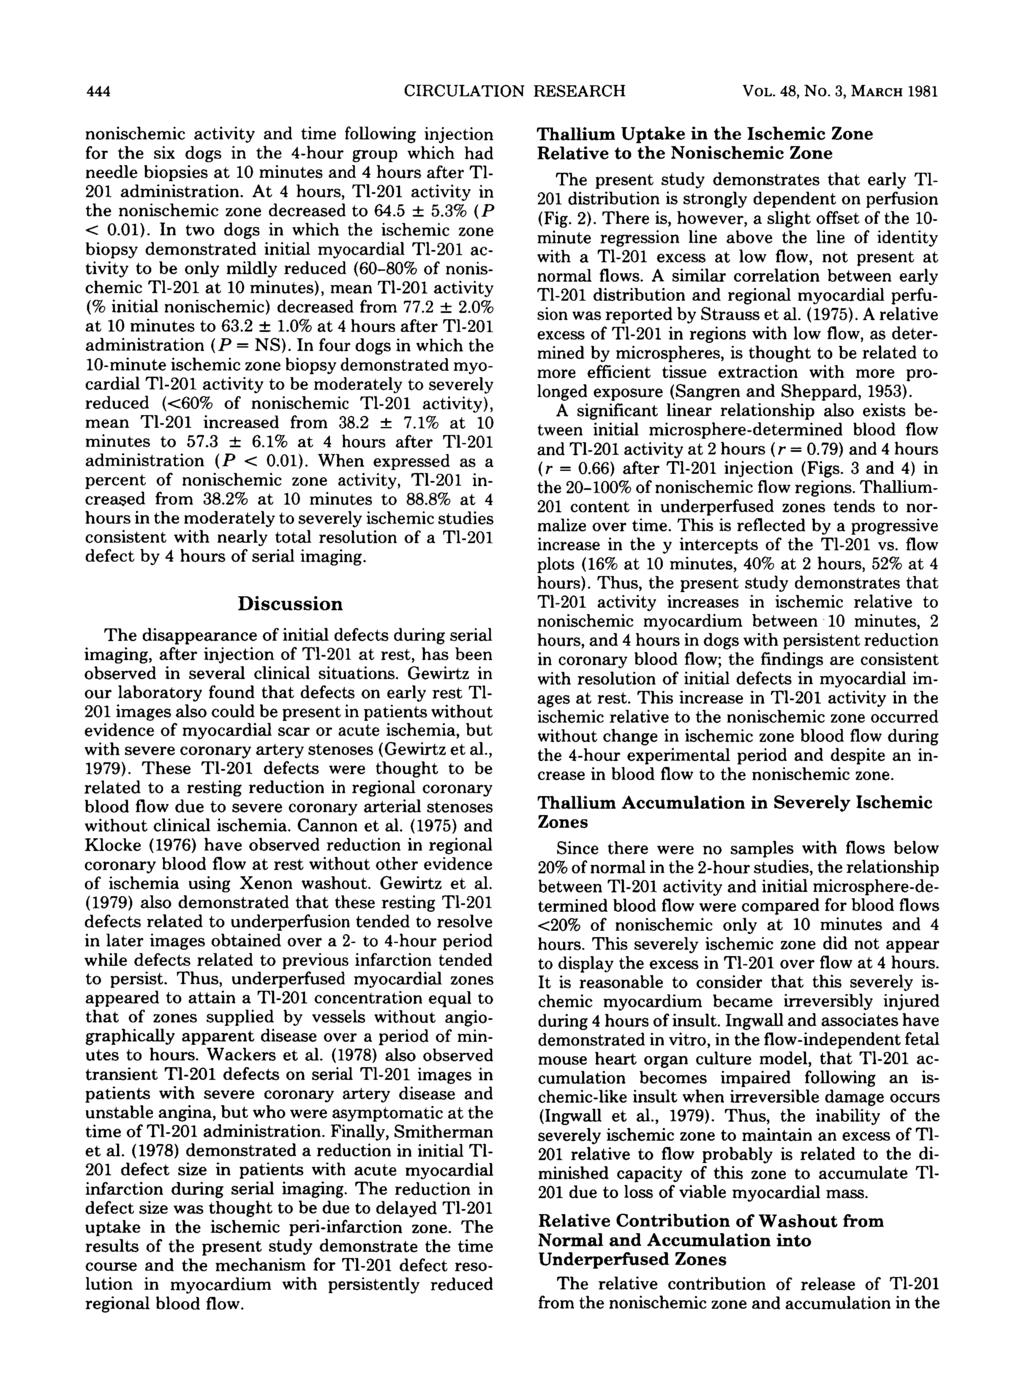 444 CIRCULATION RESEARCH VOL. 48, No. 3, MARCH 98 nonschemc actvty and tme followng njecton for the sx dogs n the 4-hour group whch had needle bopses at 0 mnutes and 4 hours after Tl- 20 admnstraton.